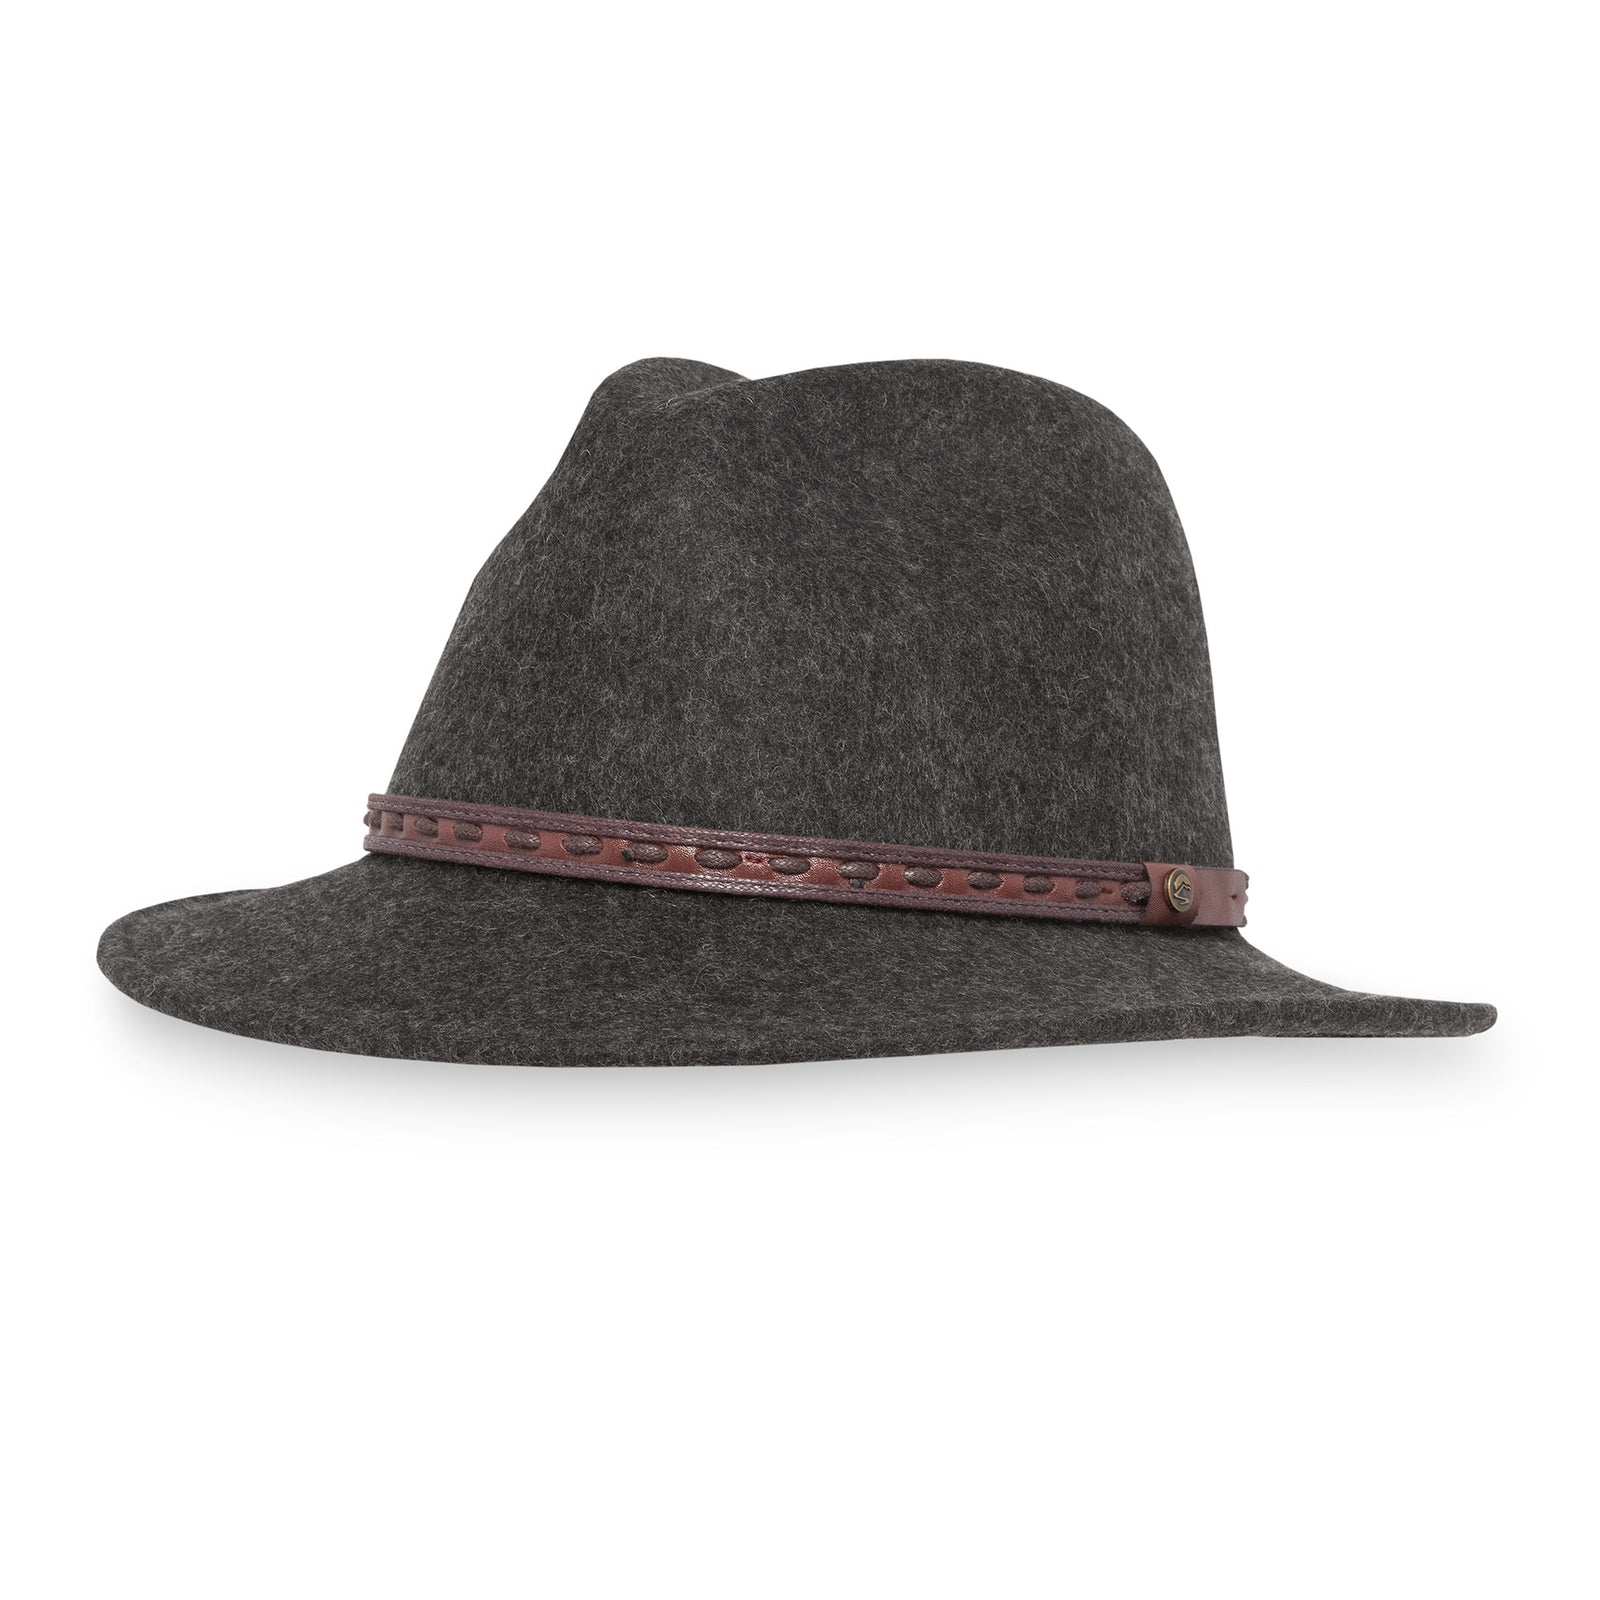 sunday afternoons rambler wool hat in heathered dark gray